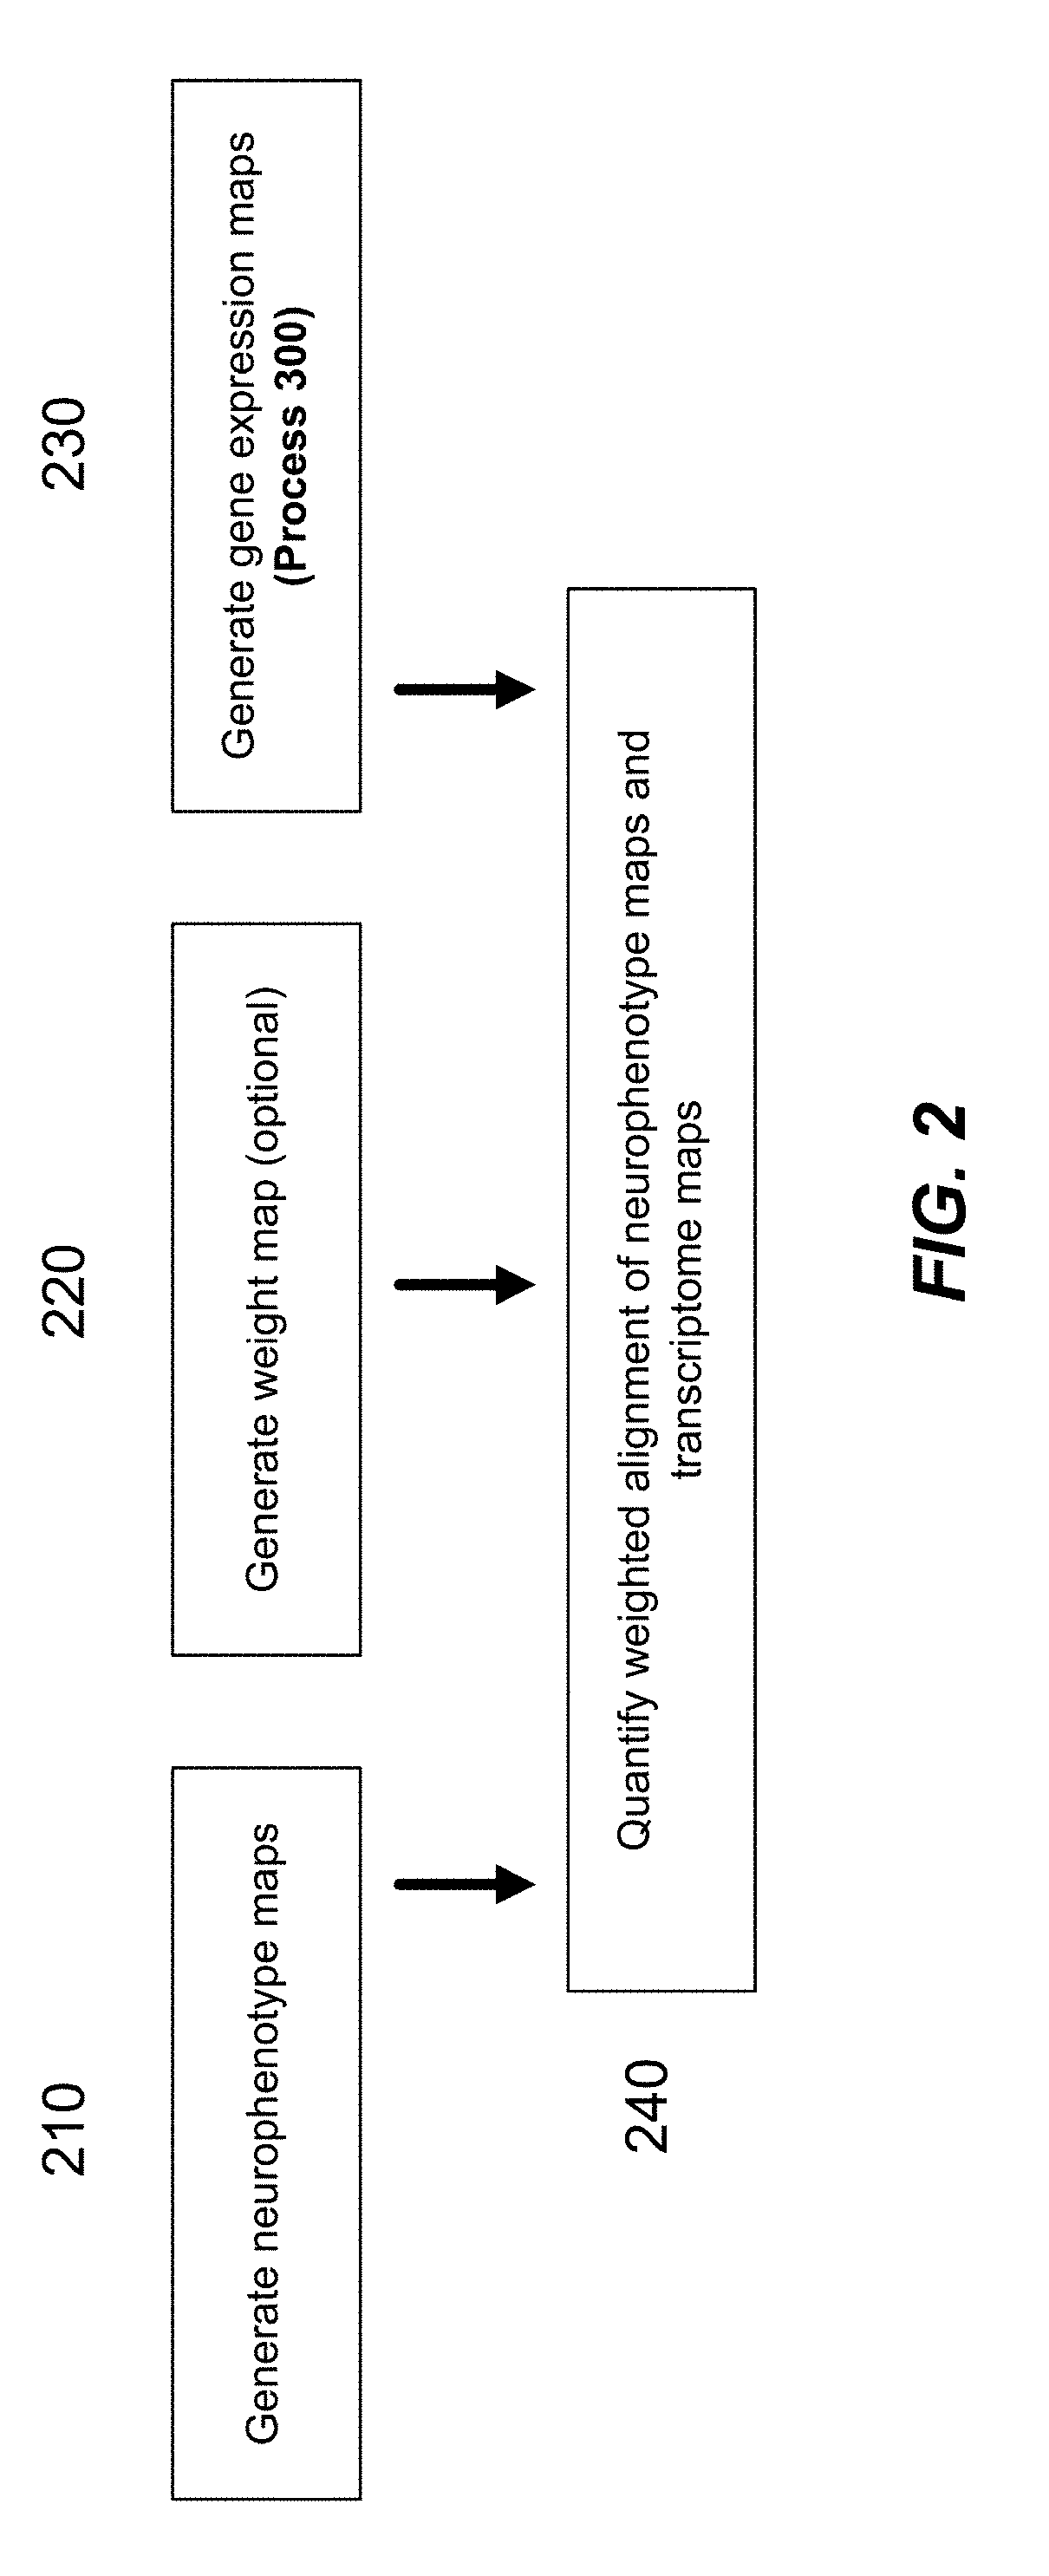 Methods and tools for detecting, diagnosing, predicting, prognosticating, or treating a neurobehavioral phenotype in a subject